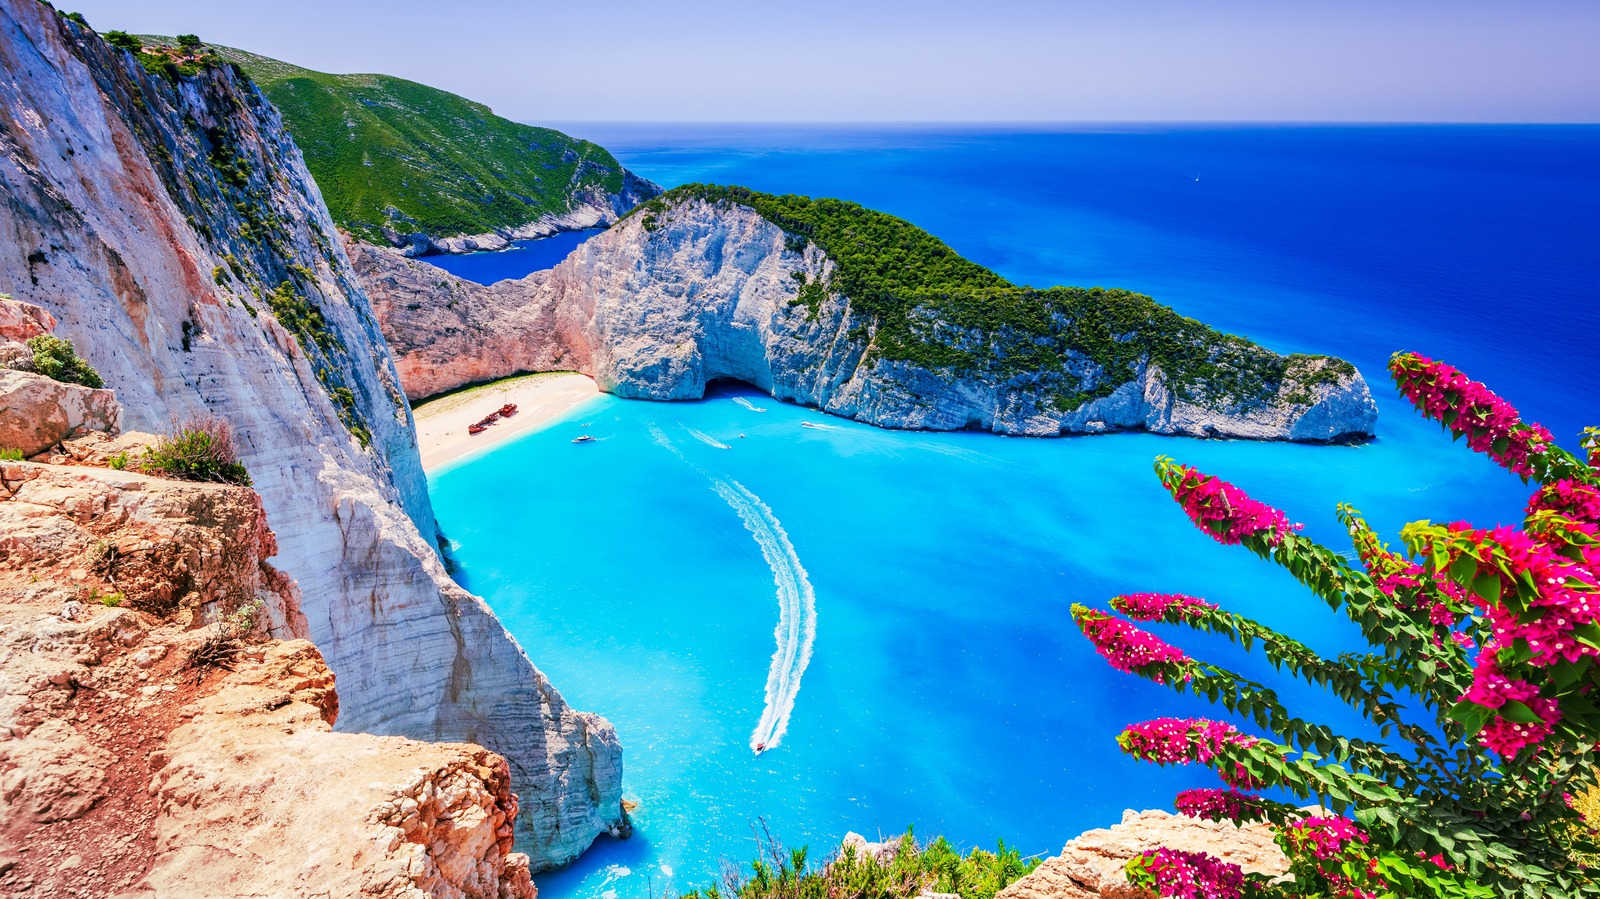 Plan A Lavish Vacation On A Budget By Visiting This Stunning Greek Island